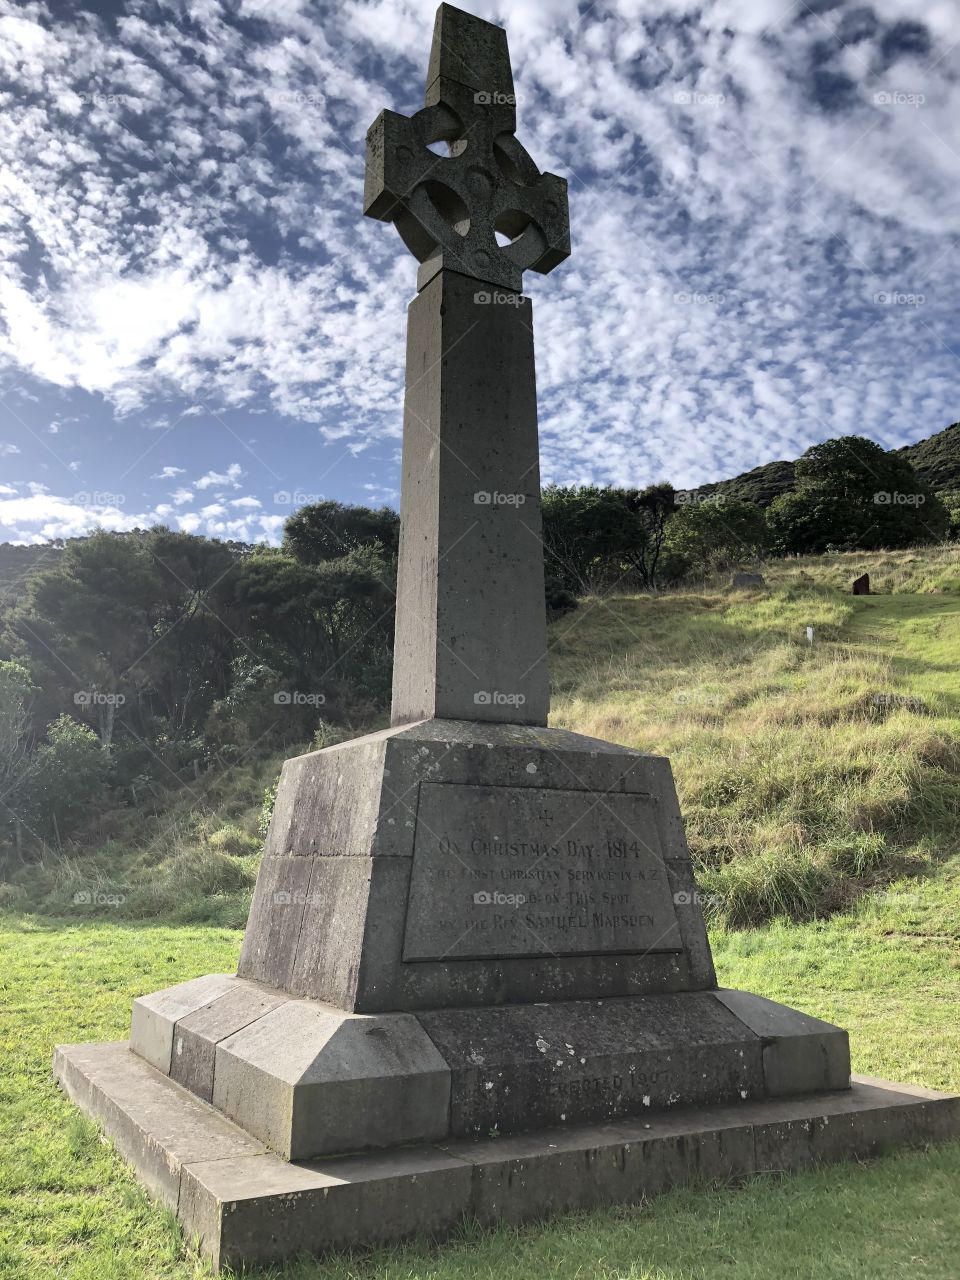 The selection of photos is from Rangihoura Bay (Marsden). This where the first missionary people came to New Zealand meeting with The Maori people, and the first sermon on Christmas Day, and also the first European baby was born.